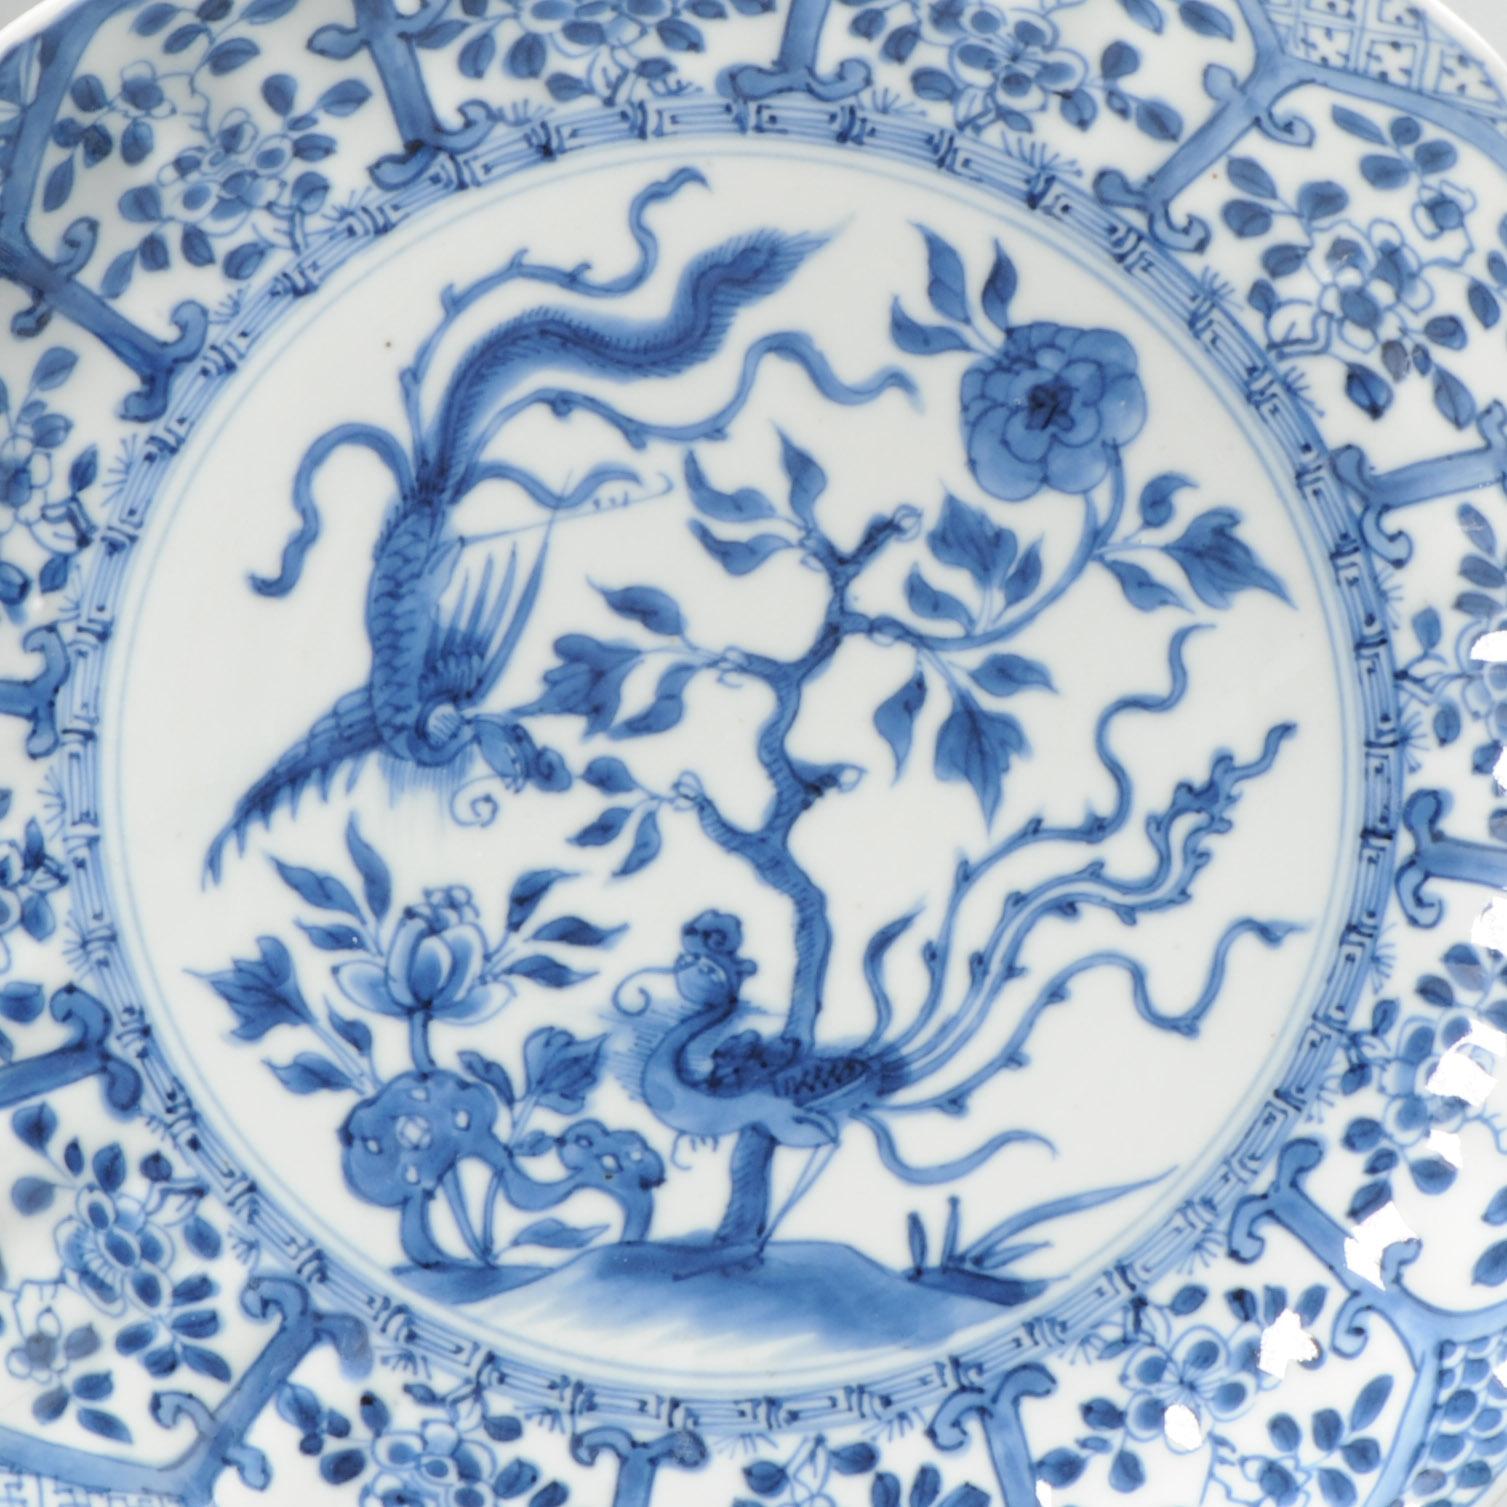 Qing Larger Antique Chinese Porcelain Ca 1700 Kangxi Period Period Fenghuang Plate For Sale